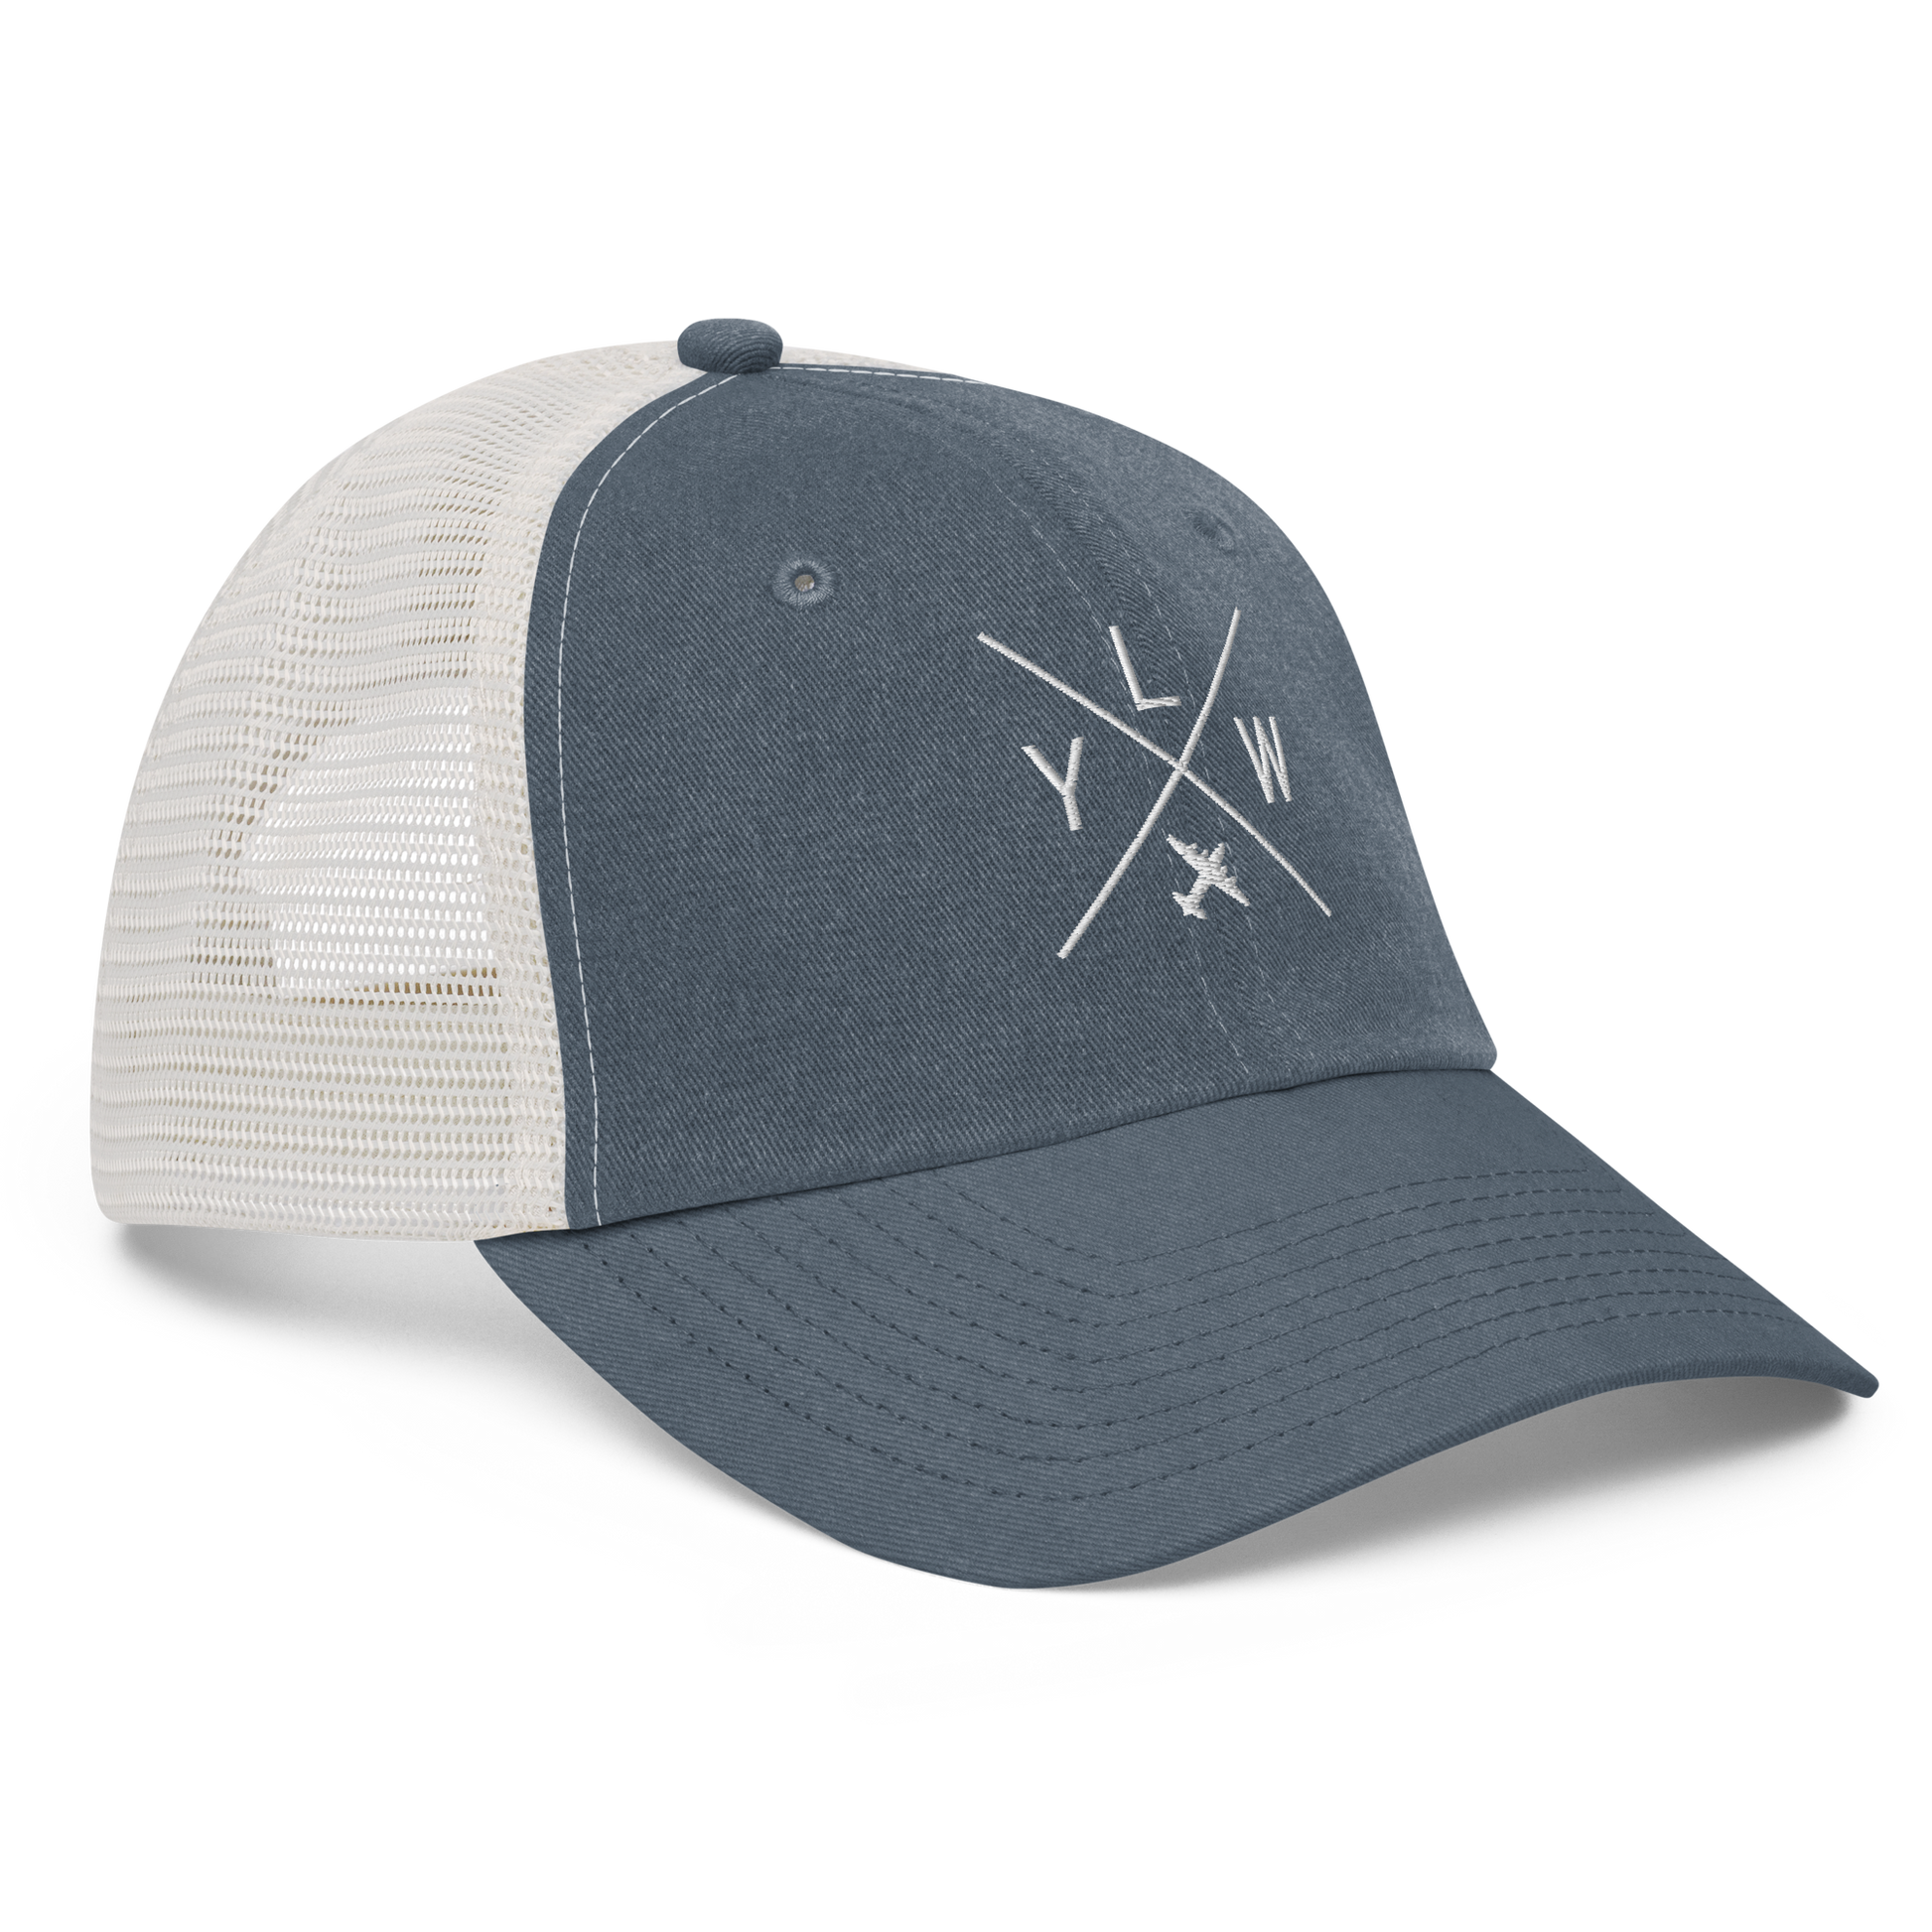 YHM Designs - YLW Kelowna Pigment-Dyed Trucker Cap - Crossed-X Design with Airport Code and Vintage Propliner - White Embroidery - Image 07